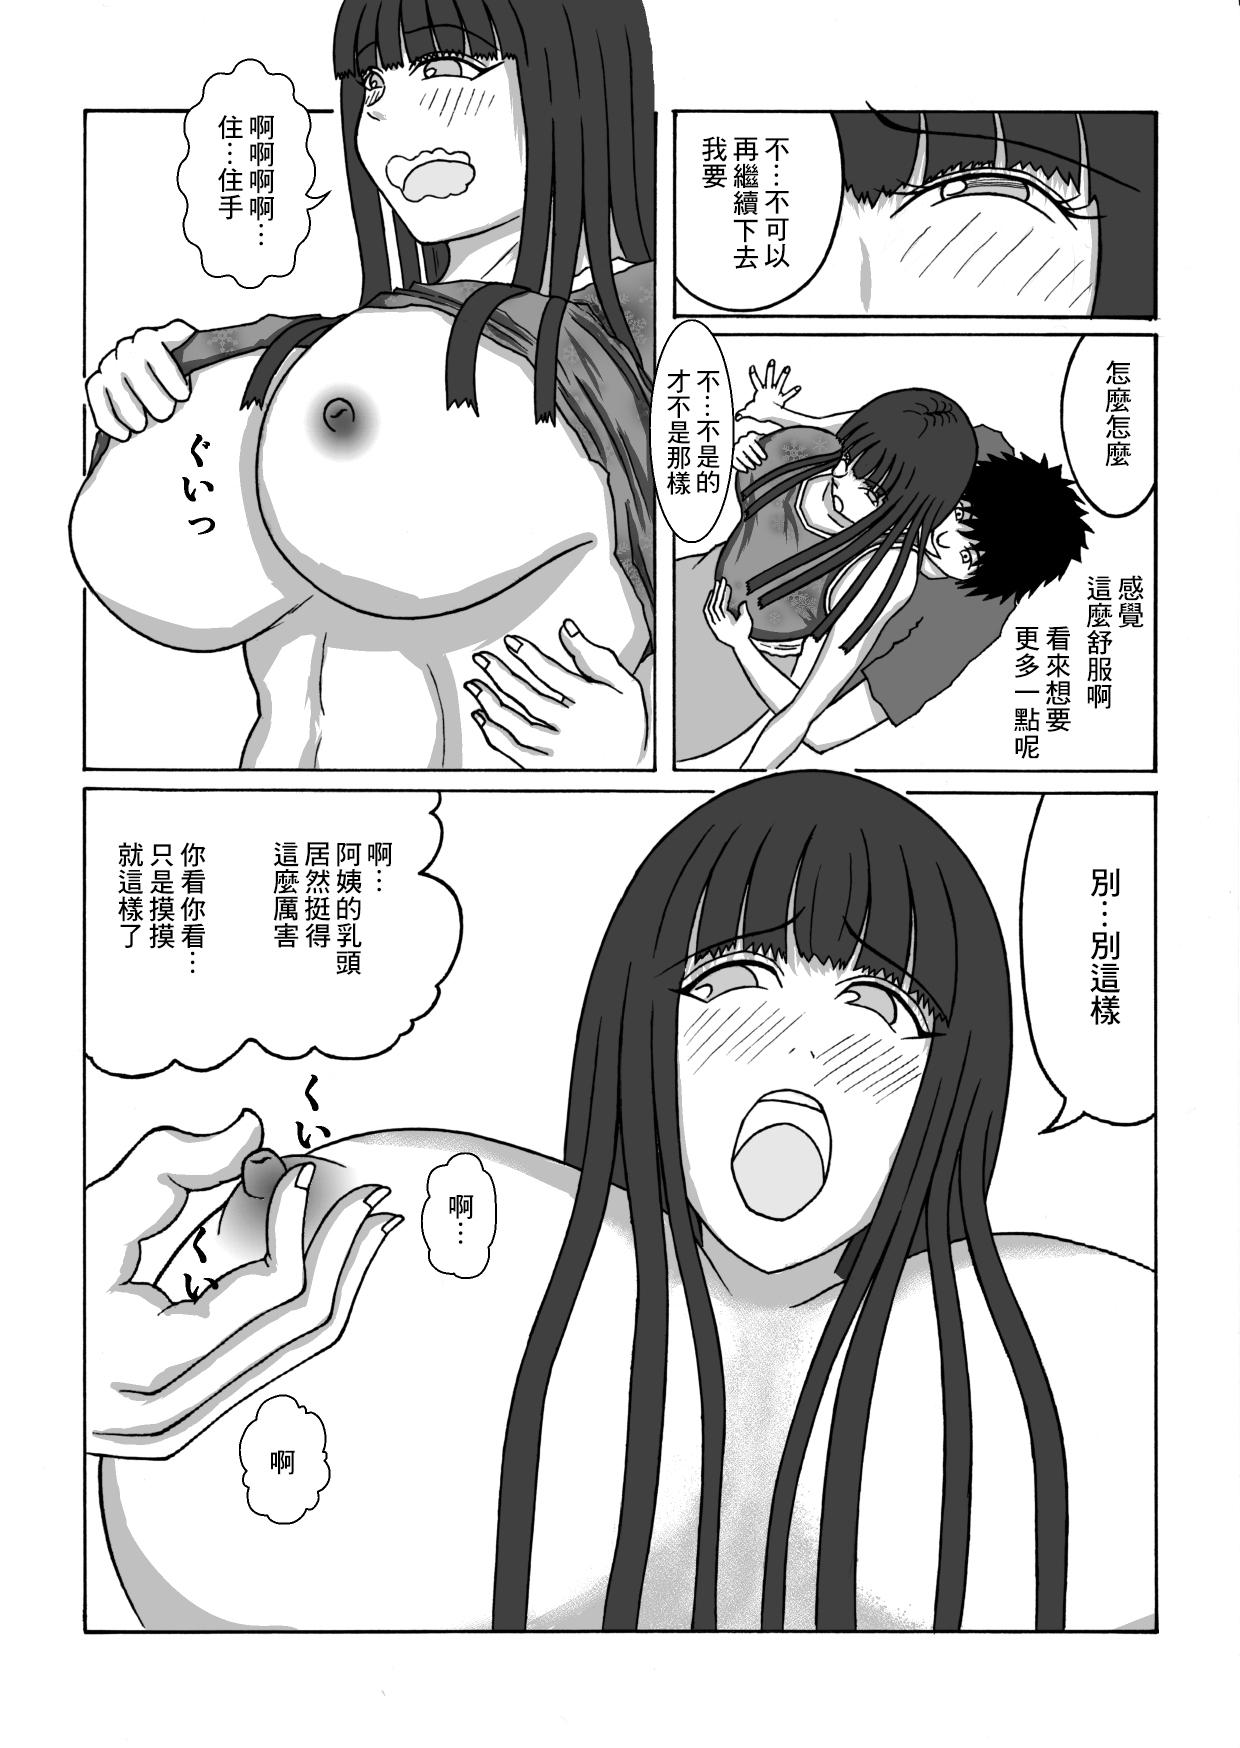 Doggy Style 和朋友的母親 Piroca - Page 6